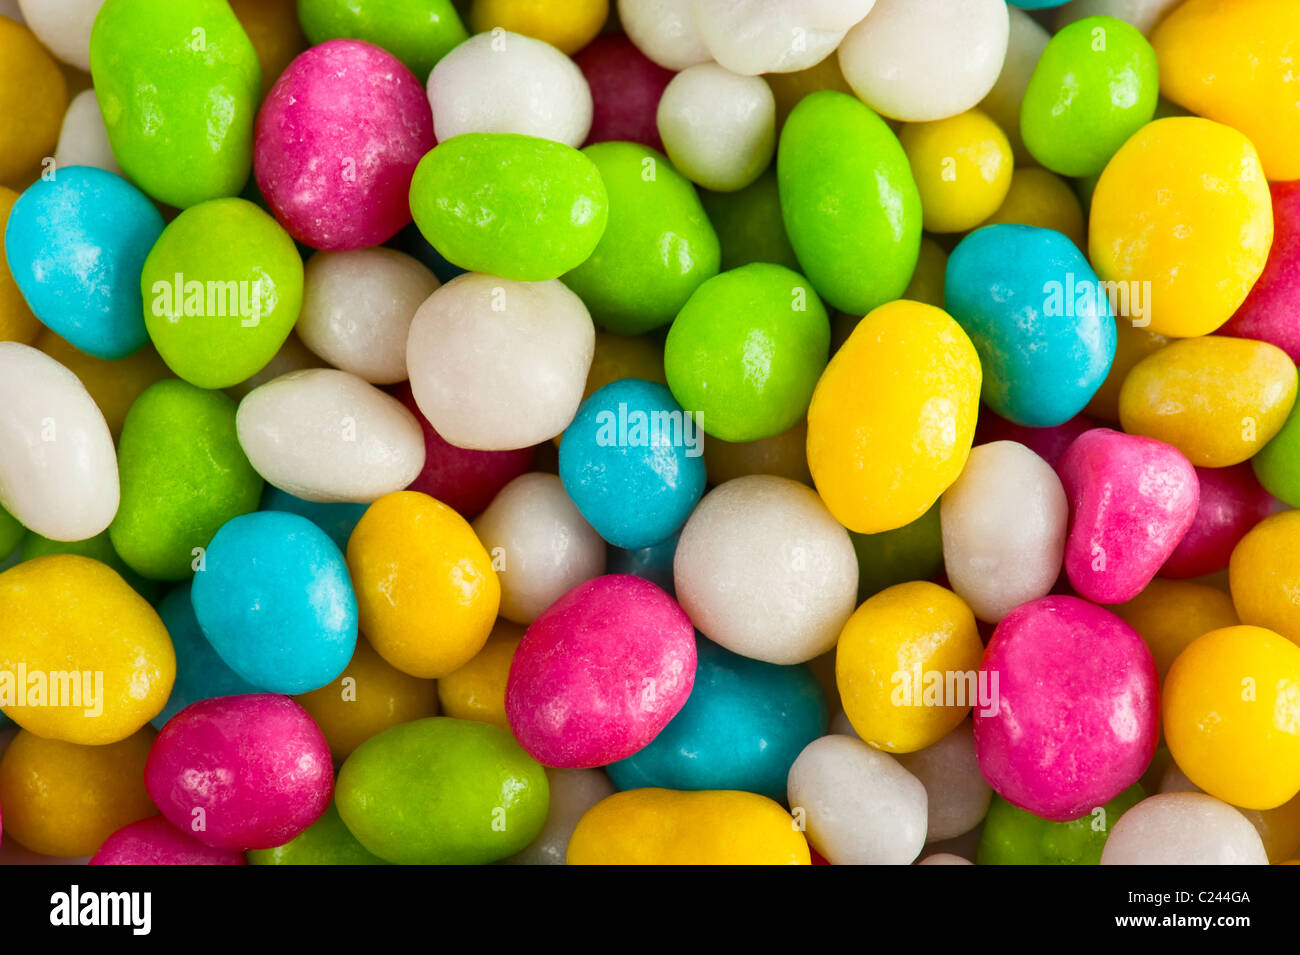 Multicolored sweet sugary candy background Stock Photo